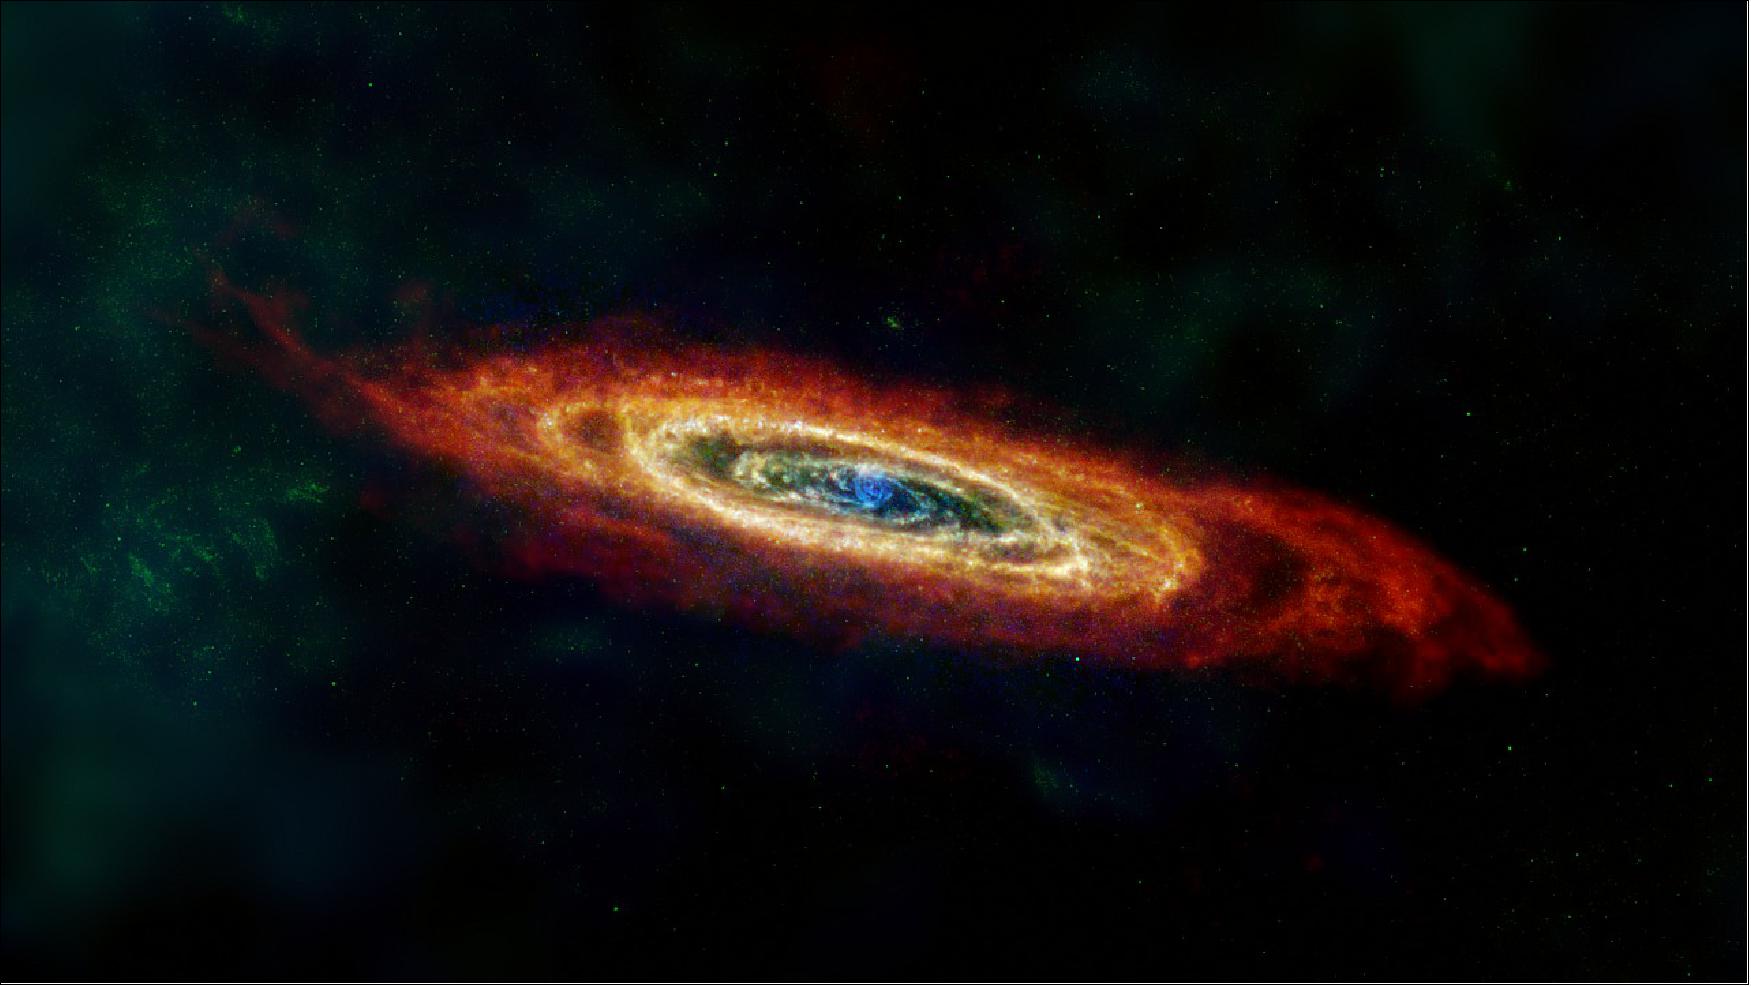 Figure 18: The Andromeda galaxy, or M31, is shown here in far-infrared and radio wavelengths of light. Some of the hydrogen gas (red) that traces the edge of Andromeda’s disc was pulled in from intergalactic space, and some was torn away from galaxies that merged with Andromeda far in the past. The image is composed of data from the European Space Agency (ESA) Herschel mission, supplemented with data from ESA’s retired Planck observatory and two retired NASA missions: the Infrared Astronomy Survey and Cosmic Background Explorer, as well as the Green Bank Telescope, WRST, and IRAM radio telescopes[image credits: ESA, NASA, NASA-JPL, Caltech, Christopher Clark (STScI), R. Braun (SKA Observatory), C. Nieten (MPI Radioastronomie), Matt Smith (Cardiff University)]